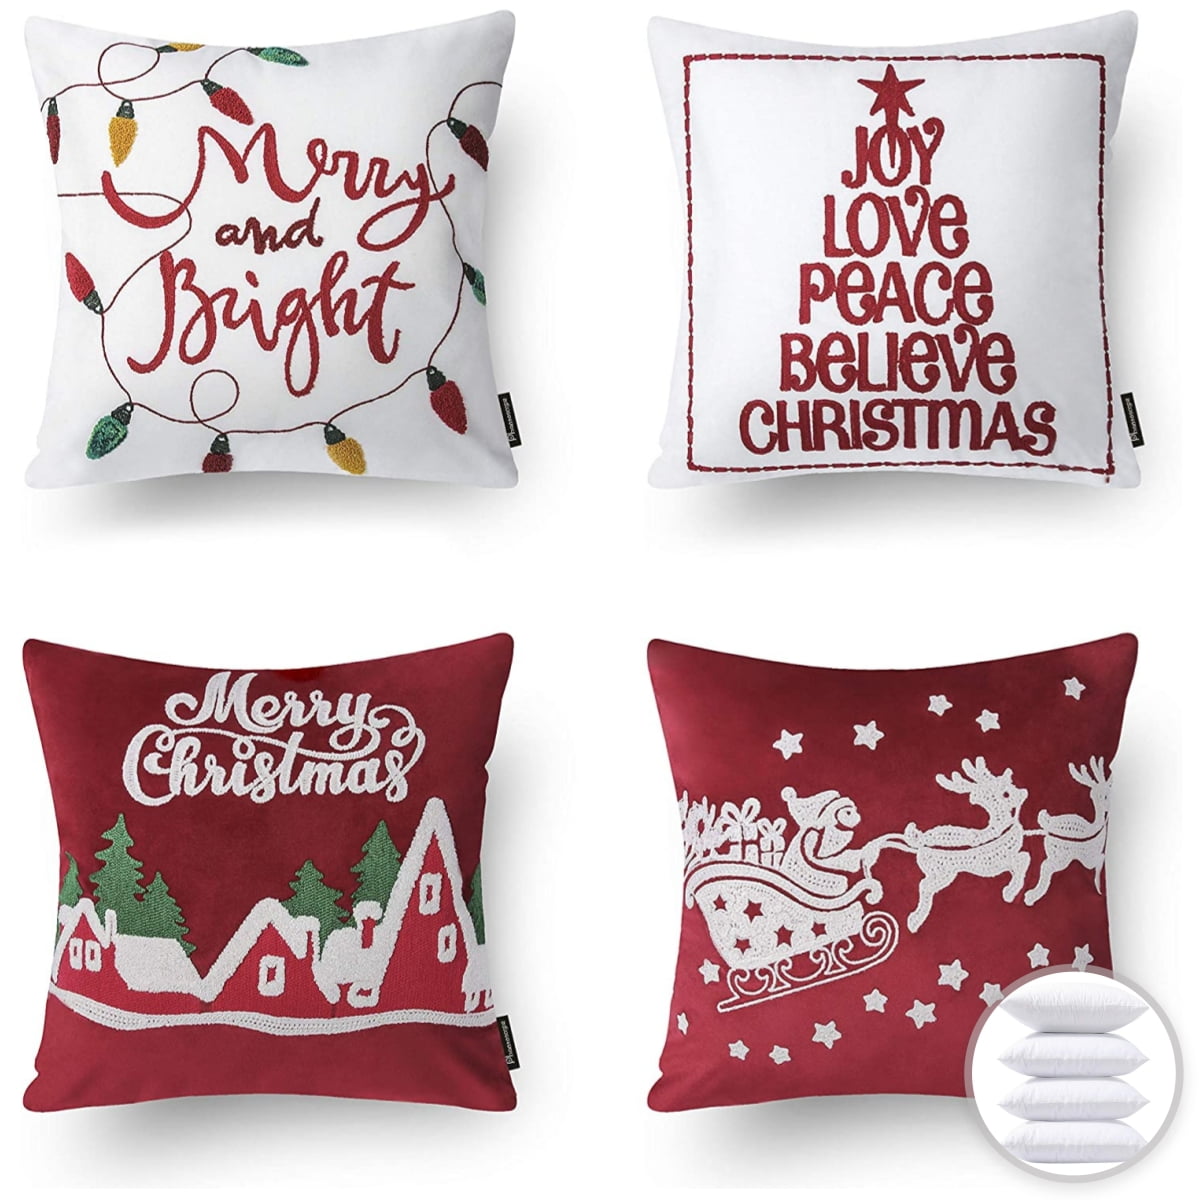 Christmas Tree and Santa Claus Printed Decorative Holiday Series Throw  Pillow with inserts, Red and White, 18 x 18, Set of 4 